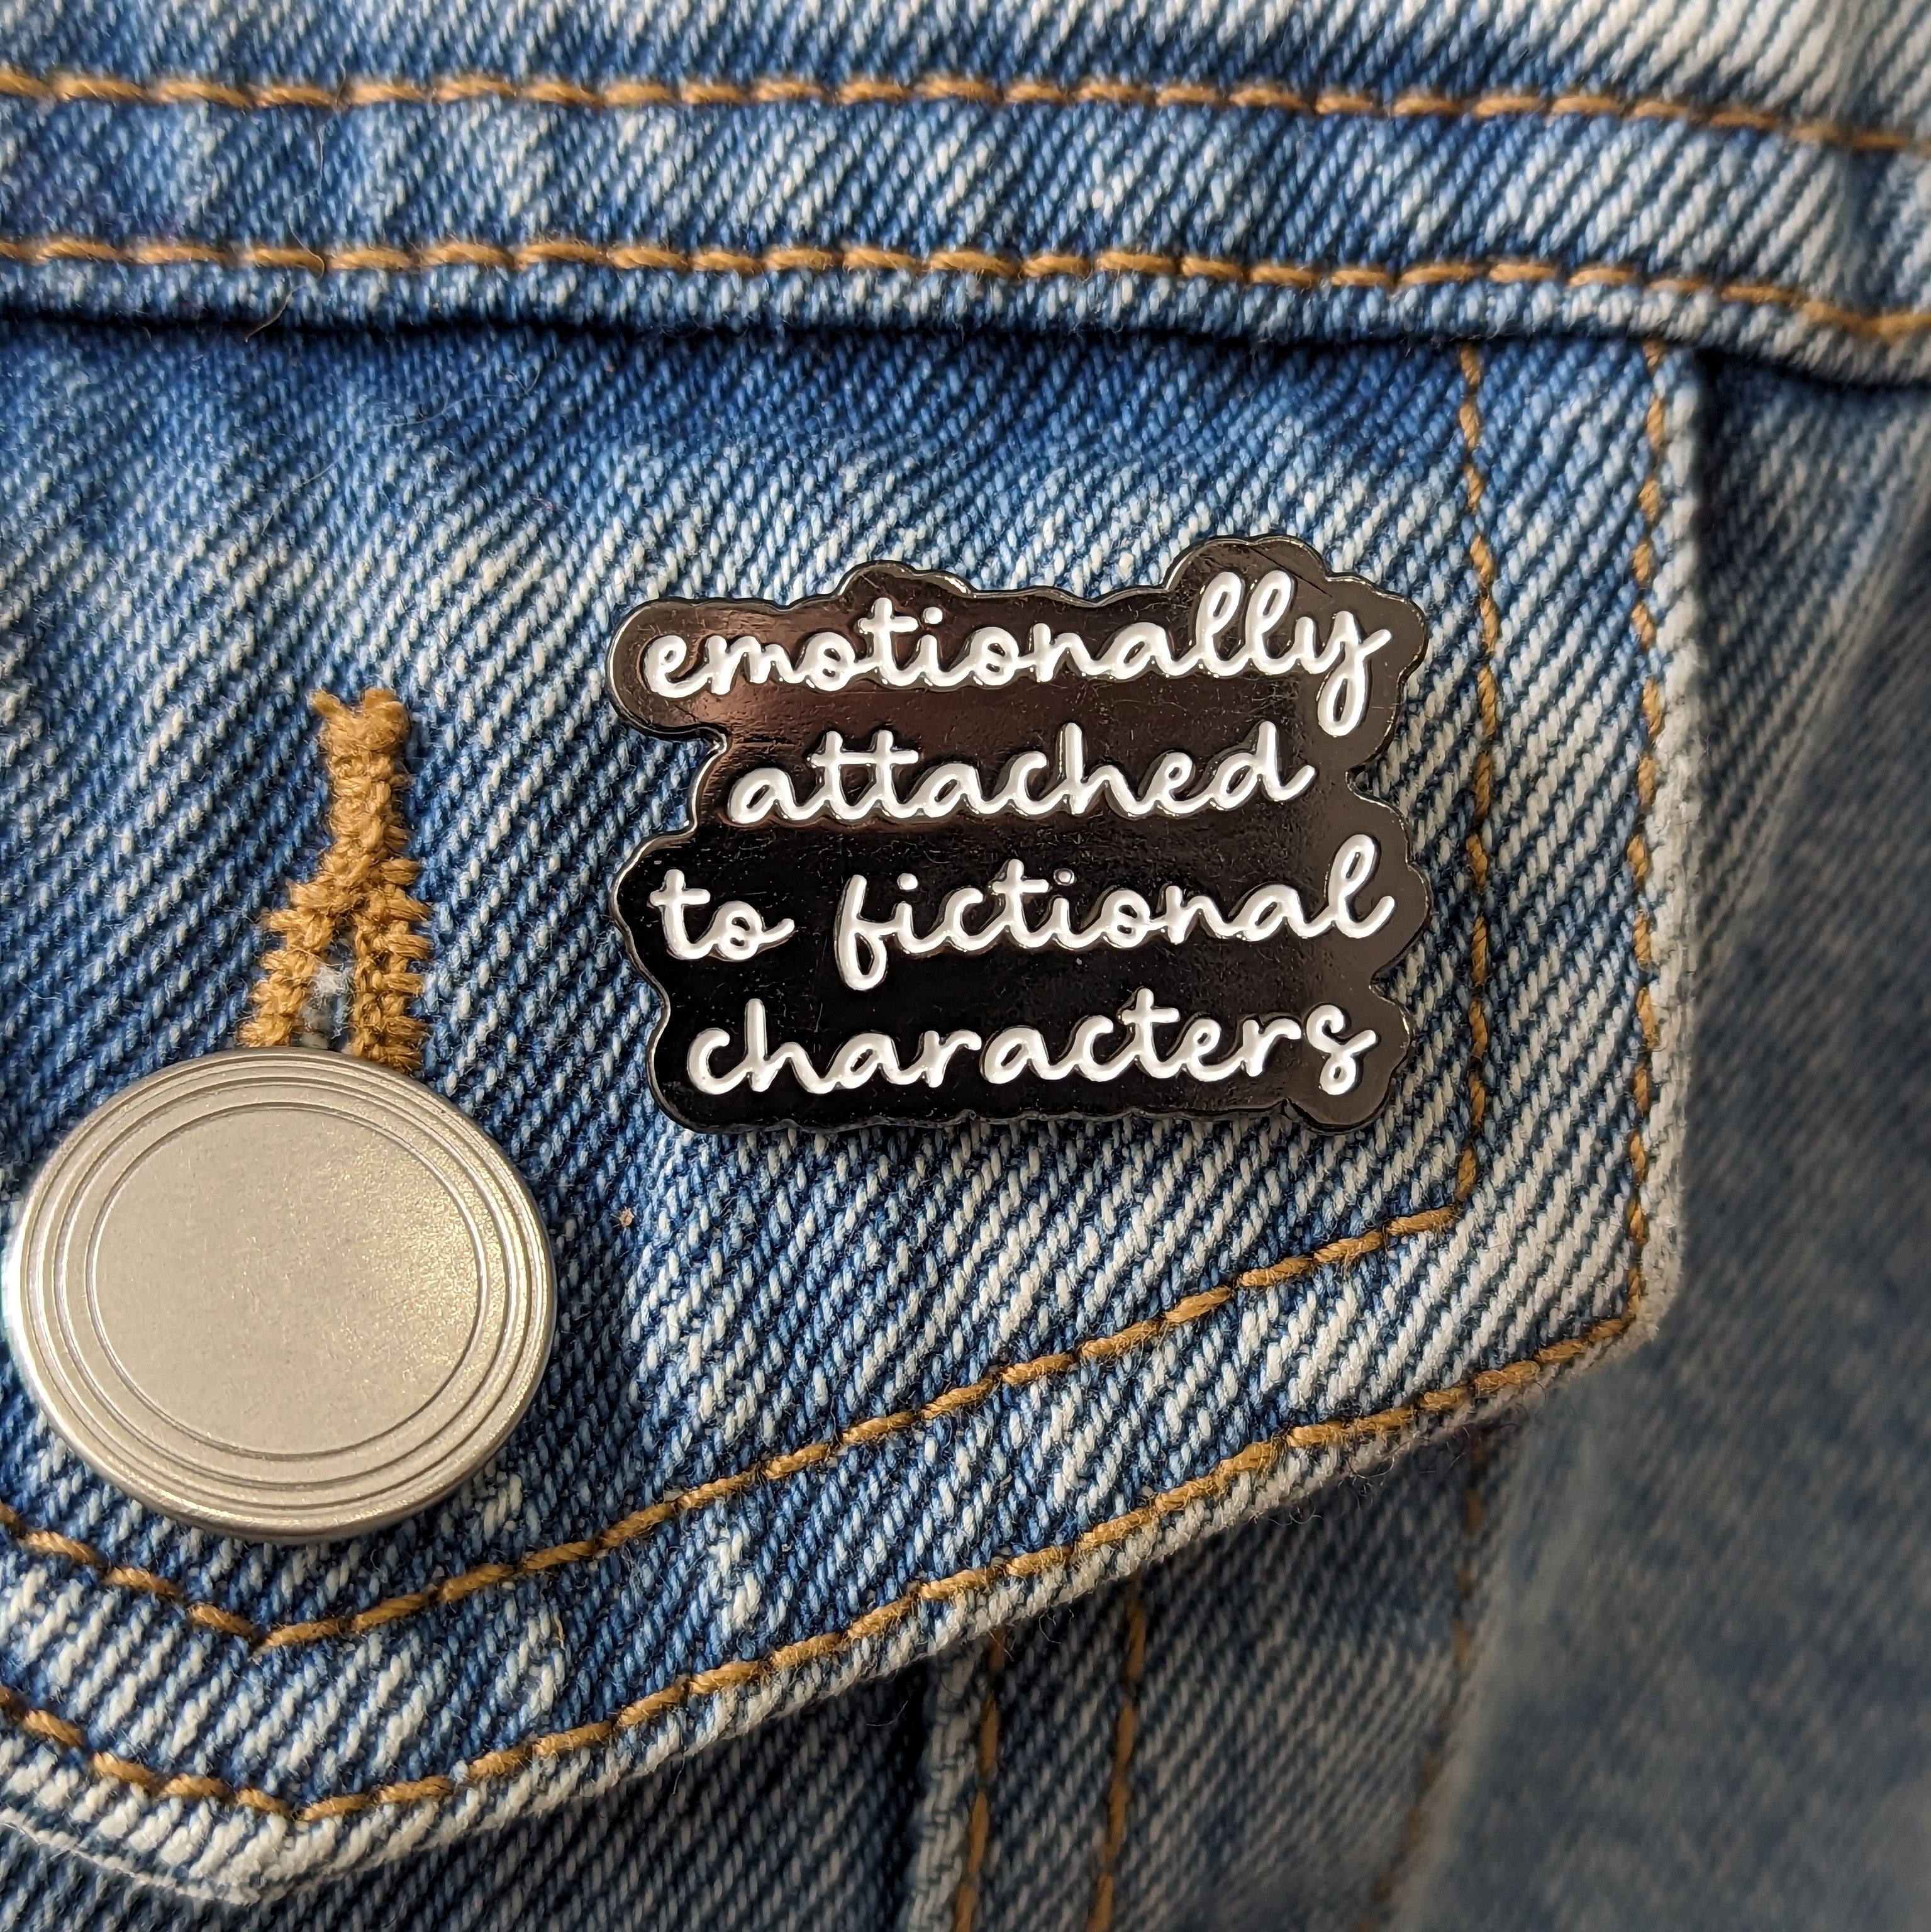 Enamel Pin - Emotionally Attached